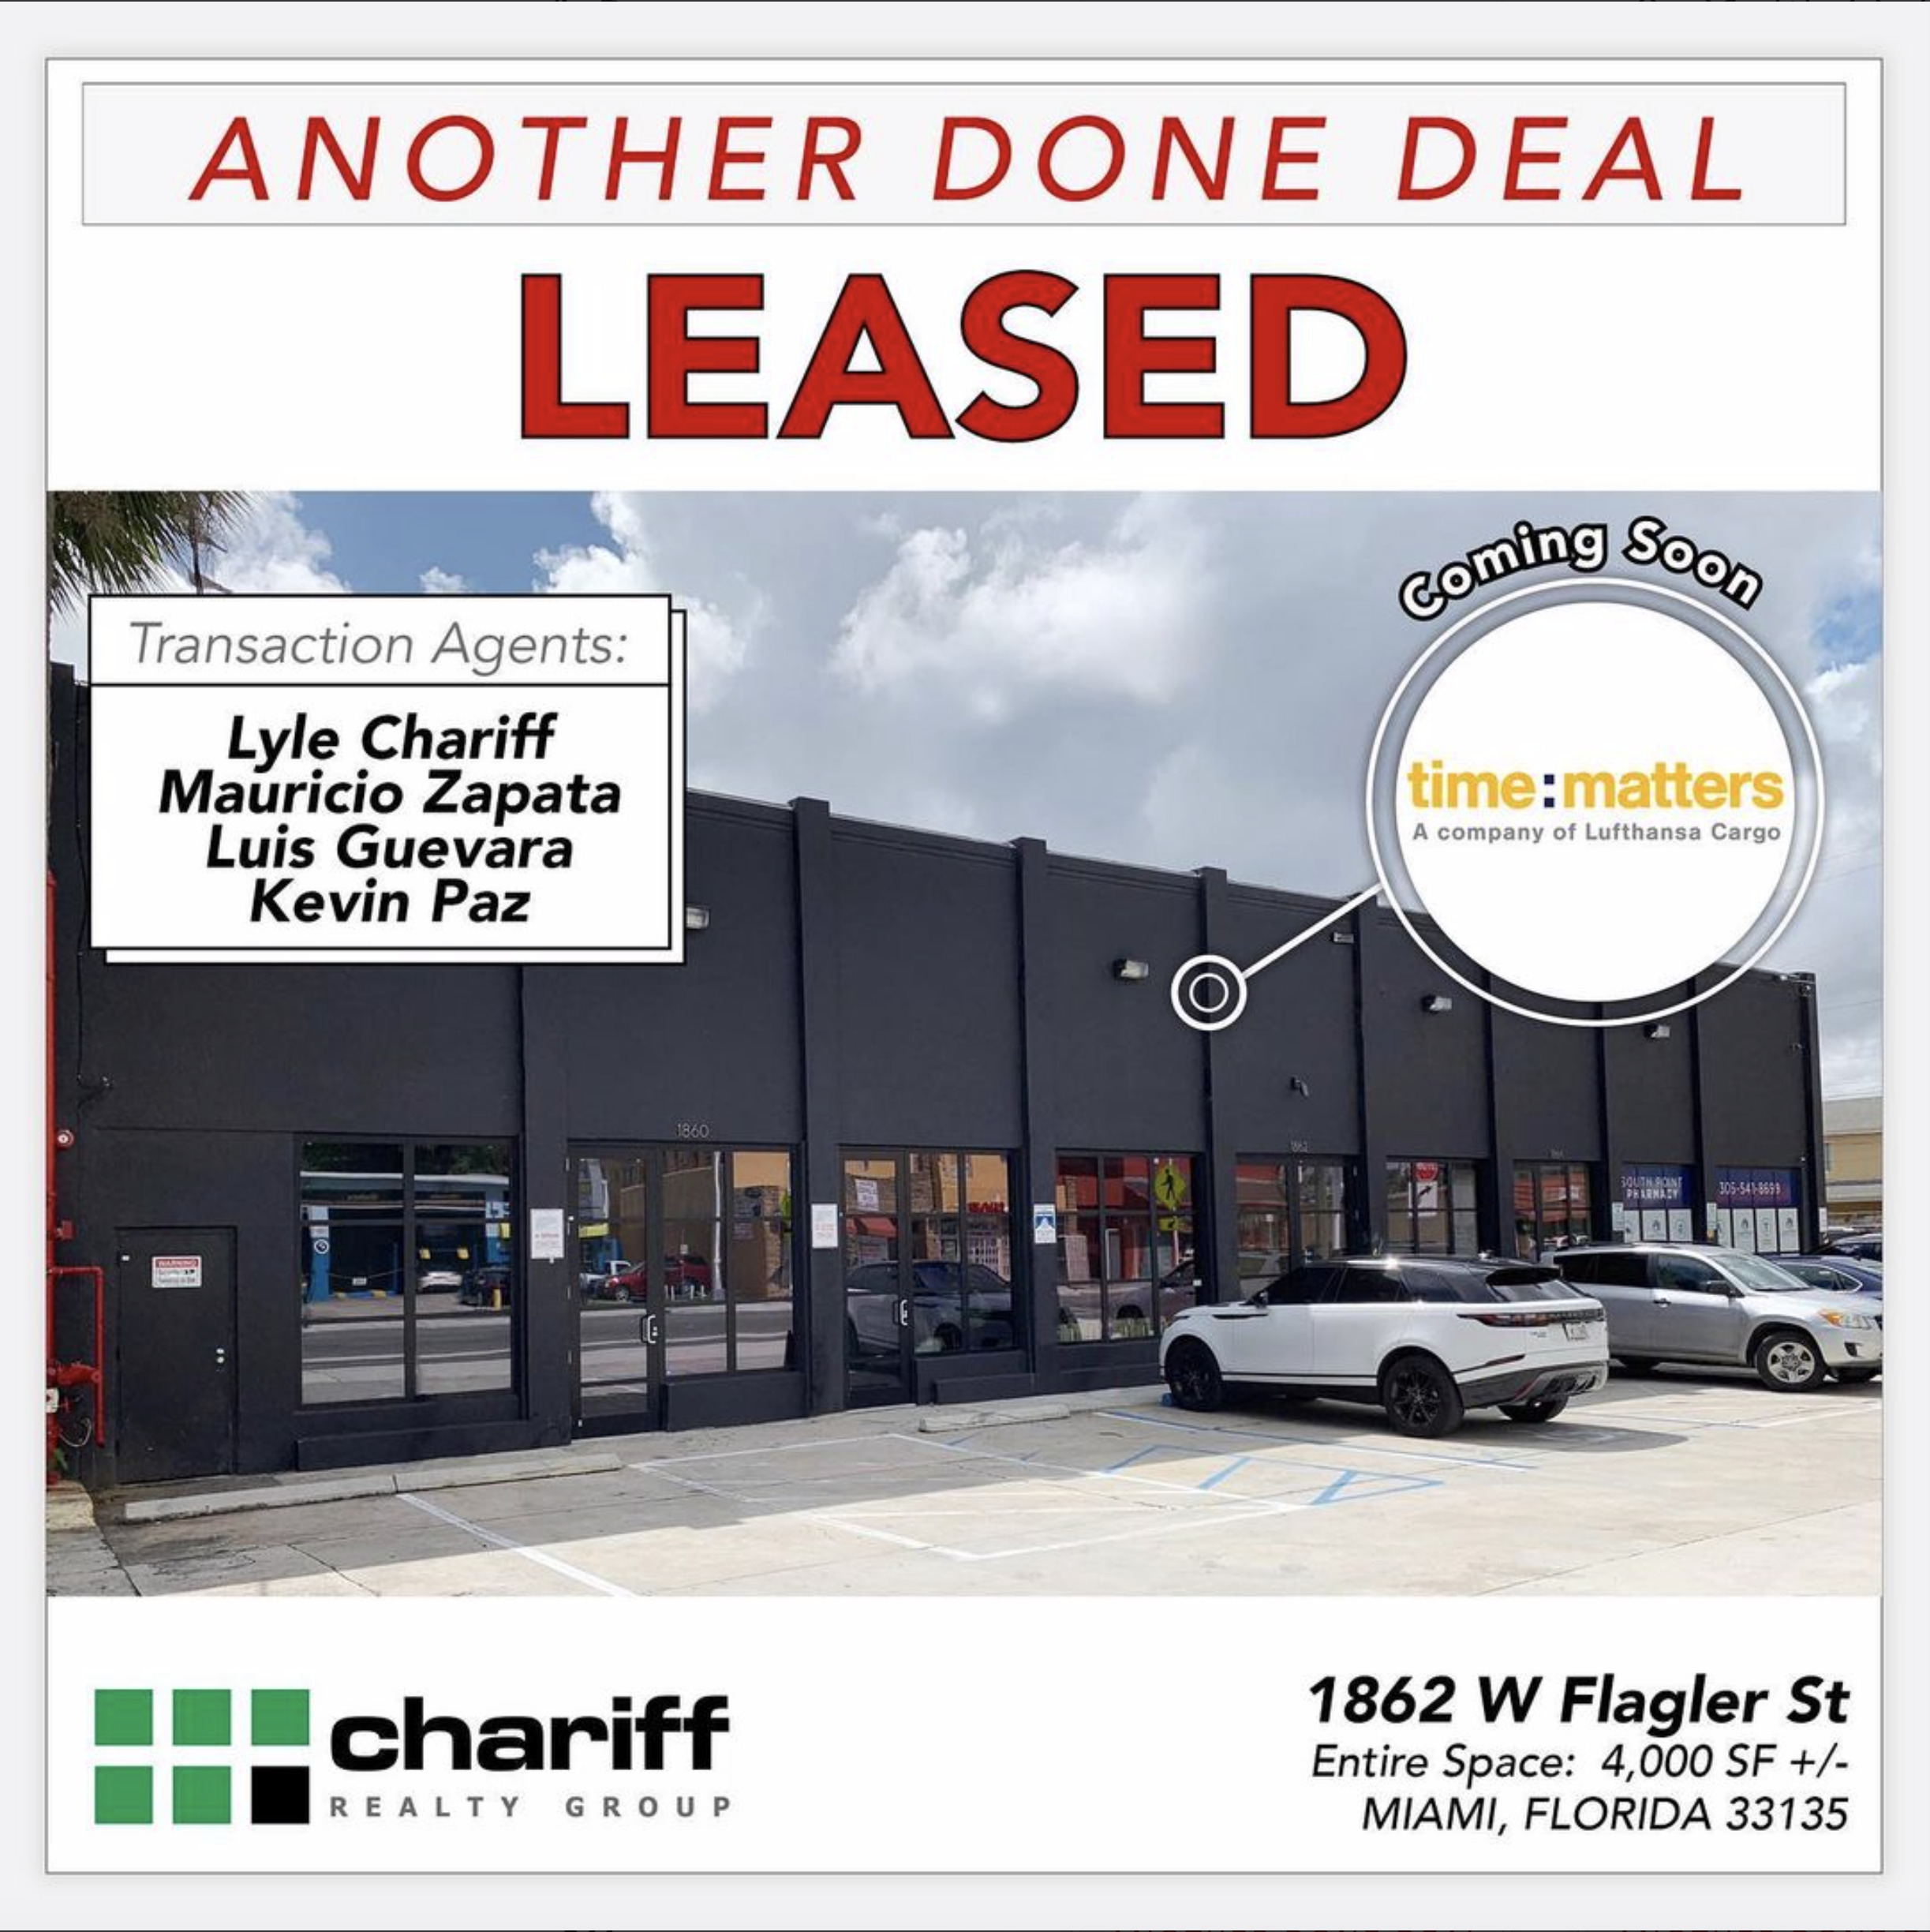 1862 W Flagler St - Another Done Deal Leased - Chariff Realty Group - Miami